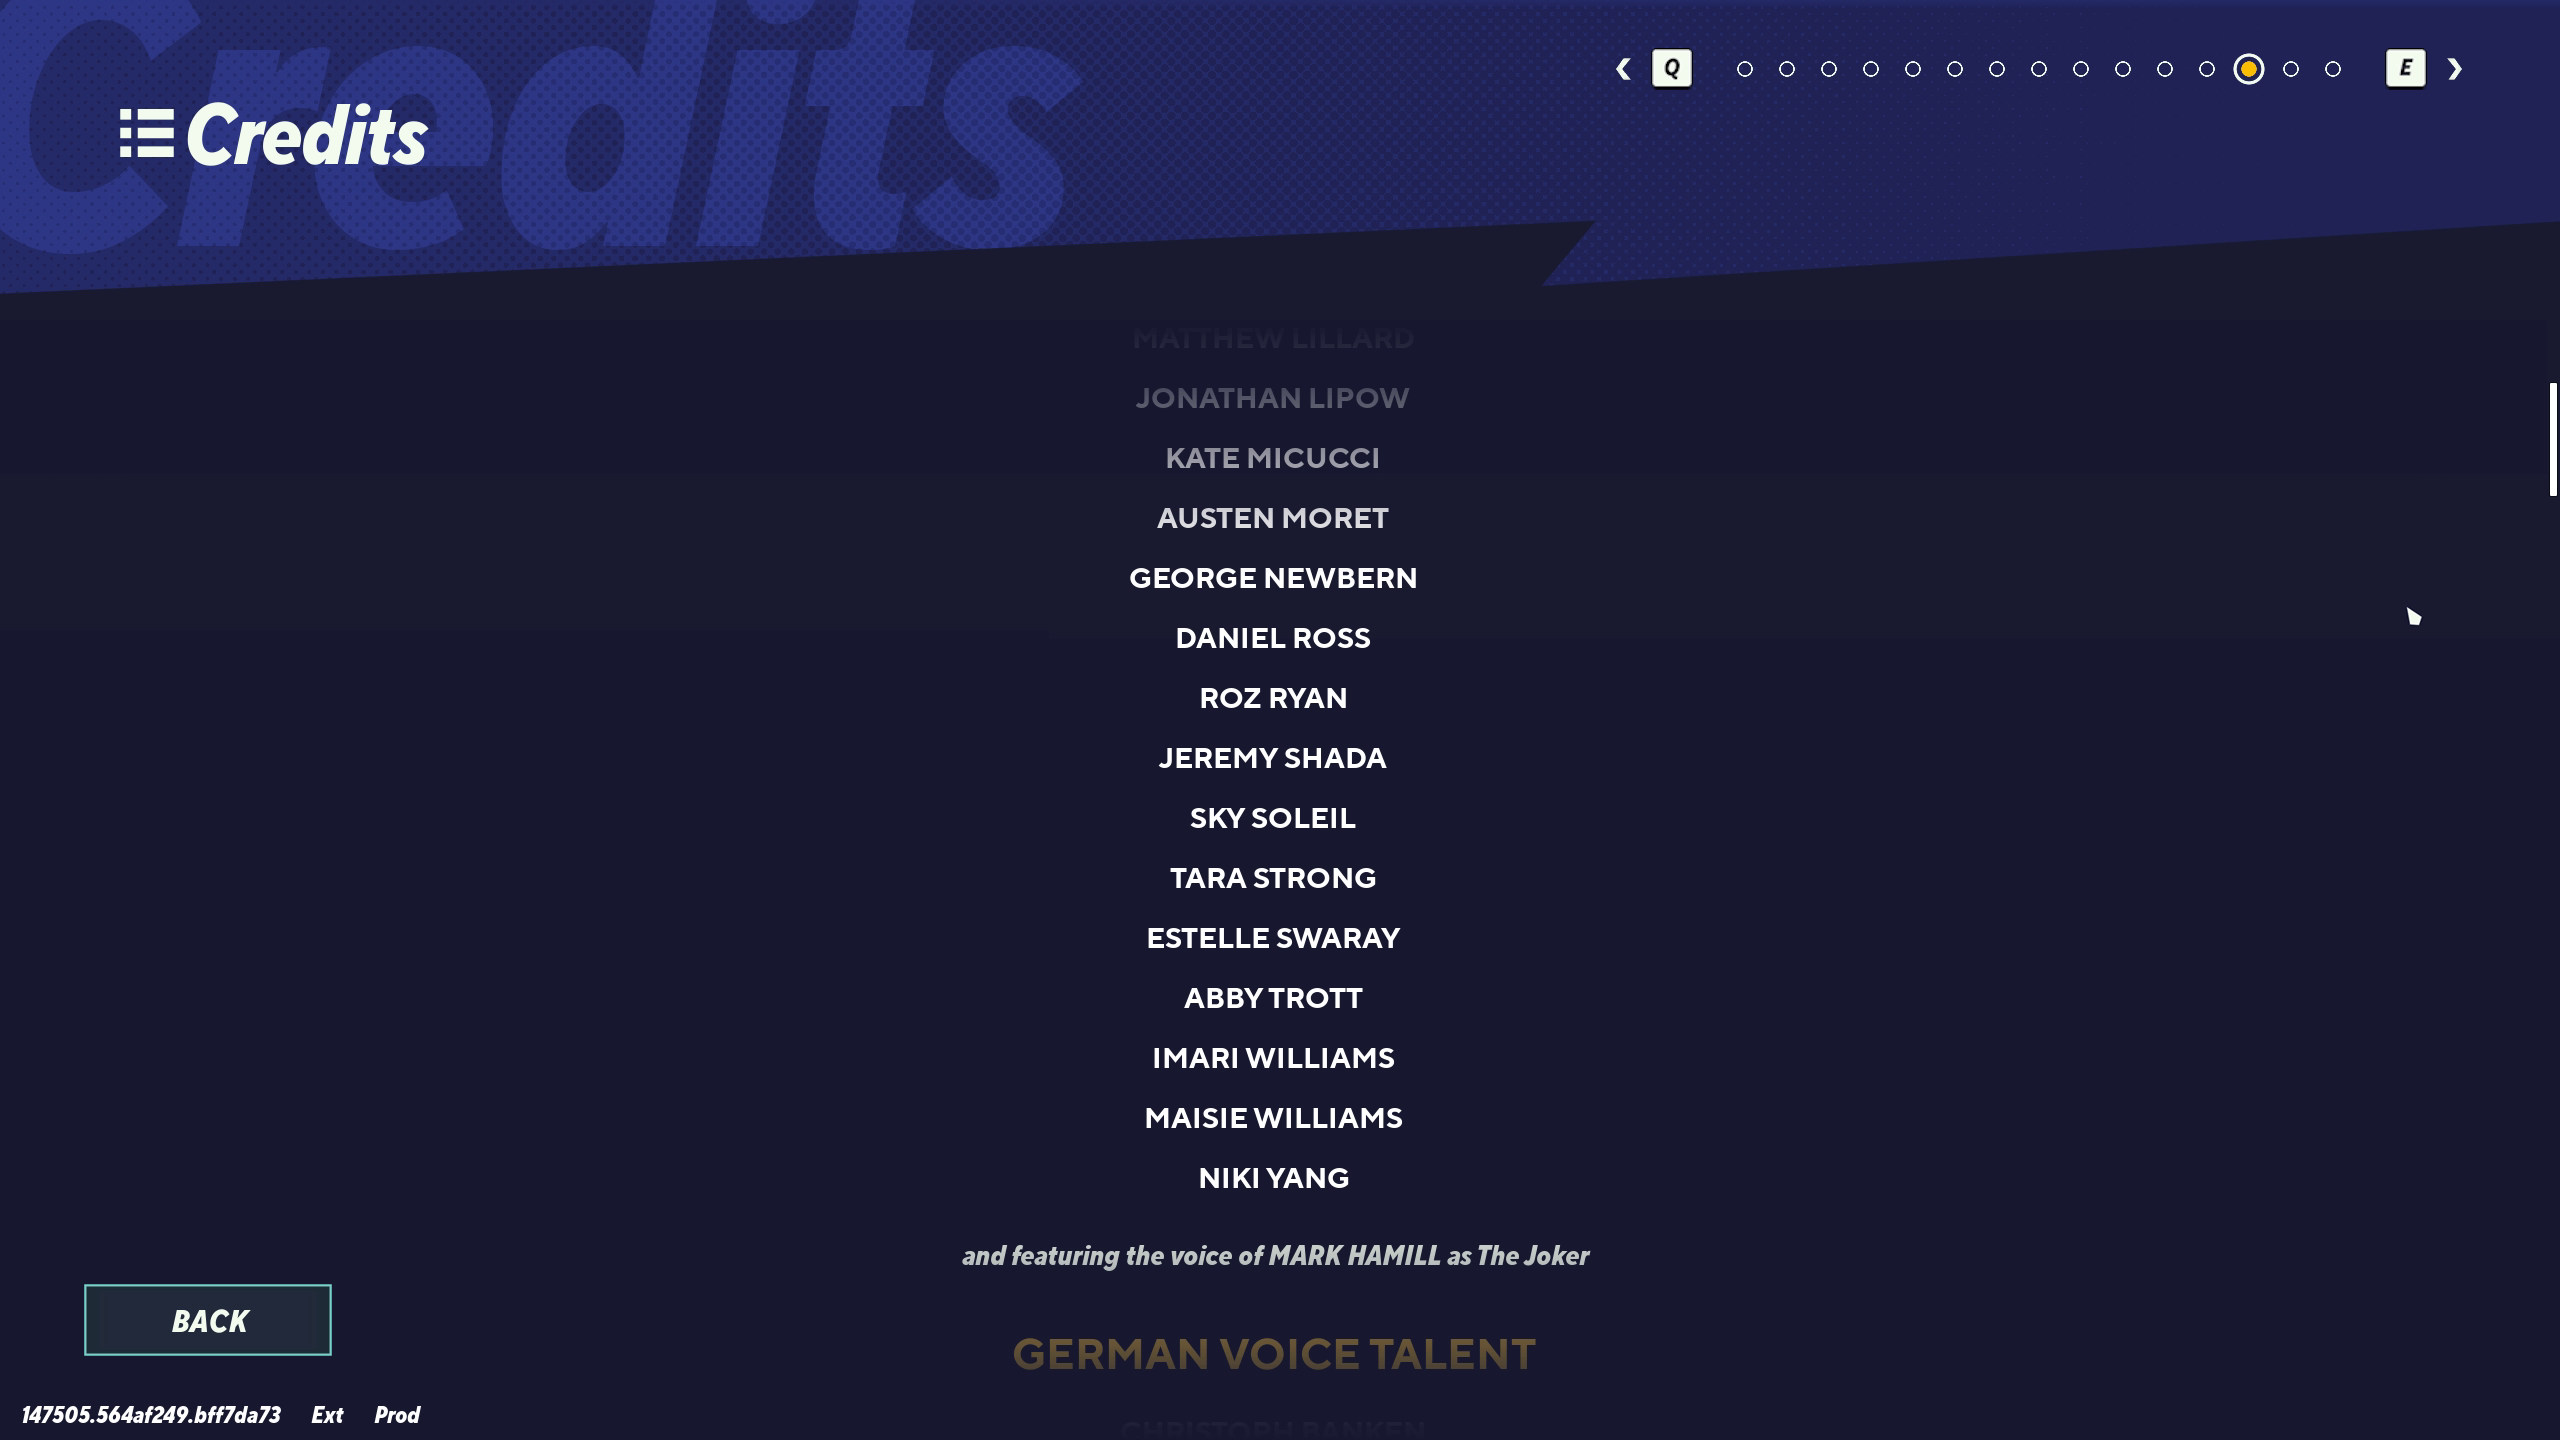 MultiVersus credits for the English voice talent, notably missing Justin Roiland.